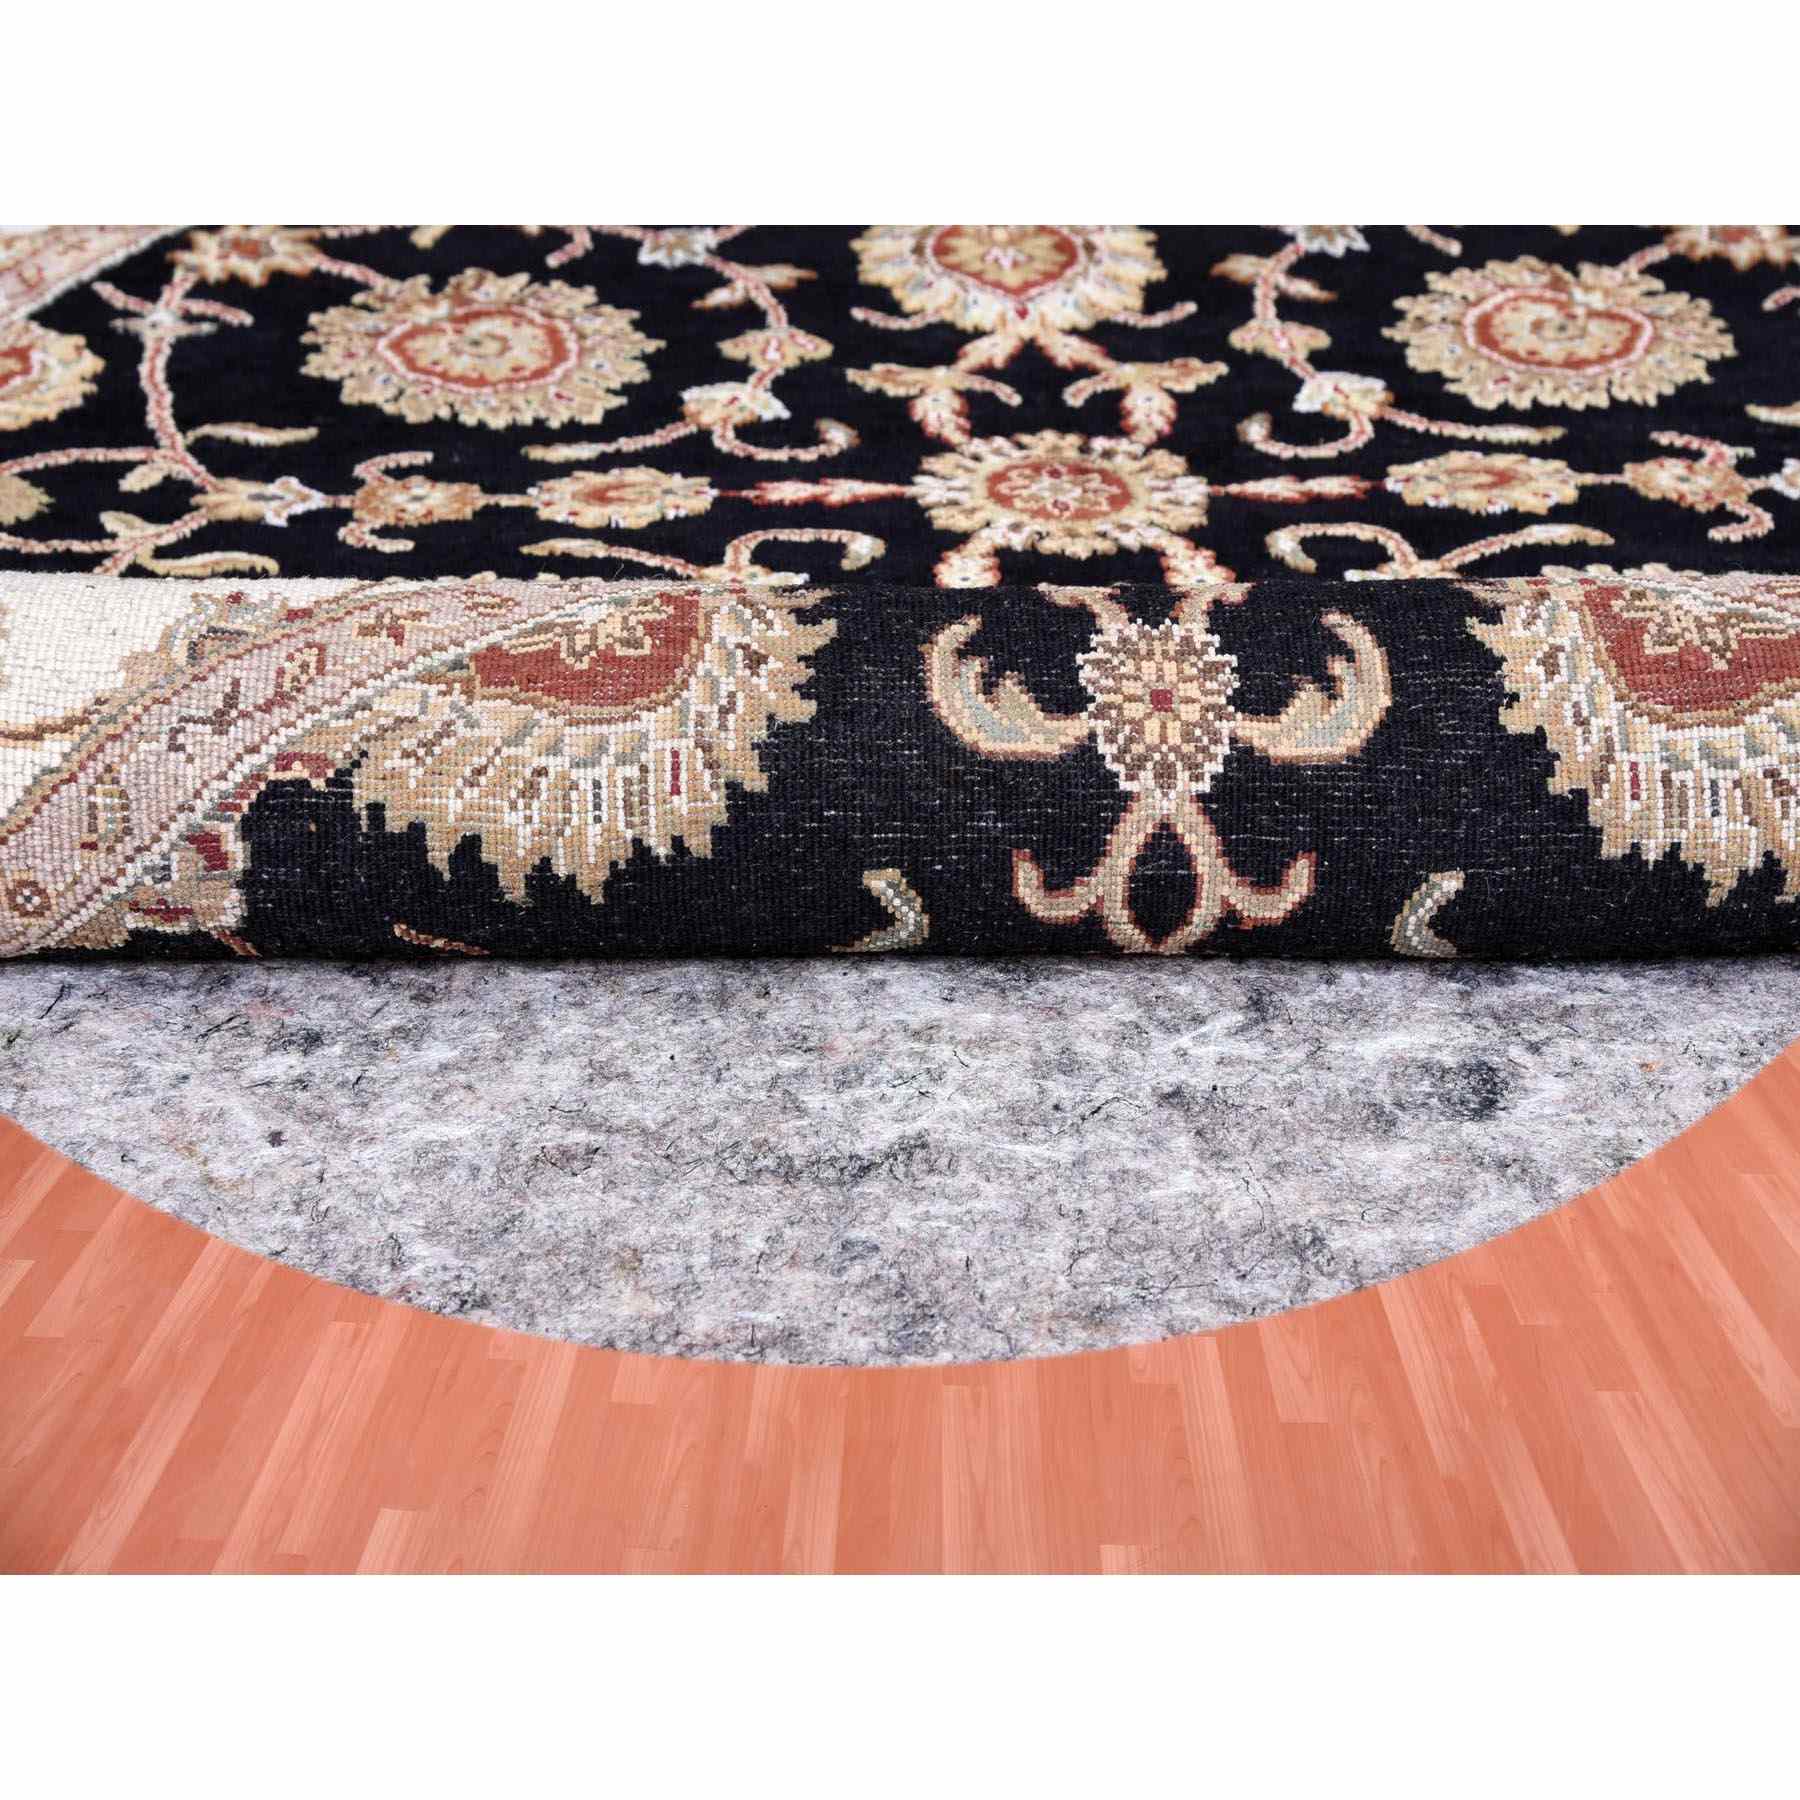 Rajasthan-Hand-Knotted-Rug-375300